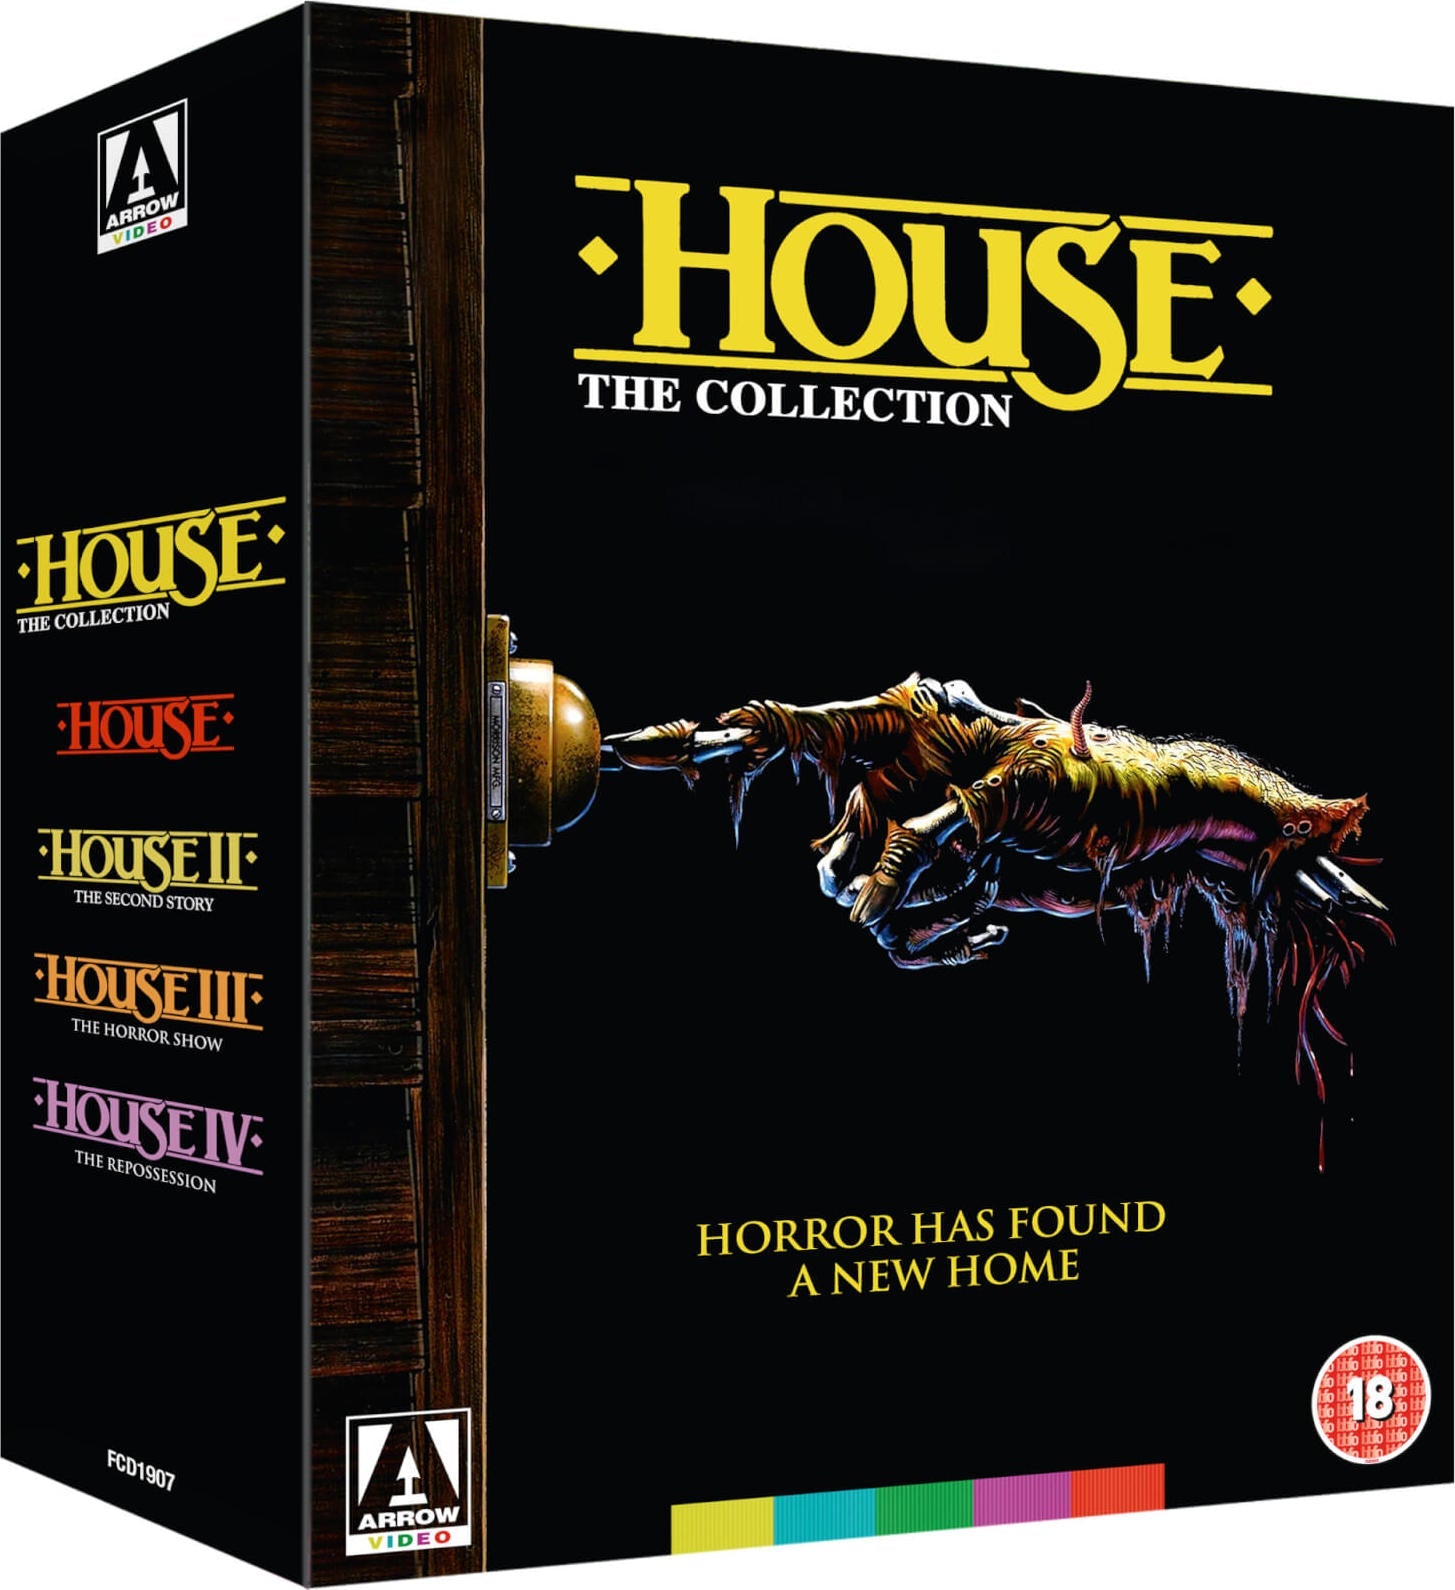 HOUSE: THE COLLECTION (REGION FREE IMPORT) BLU-RAY